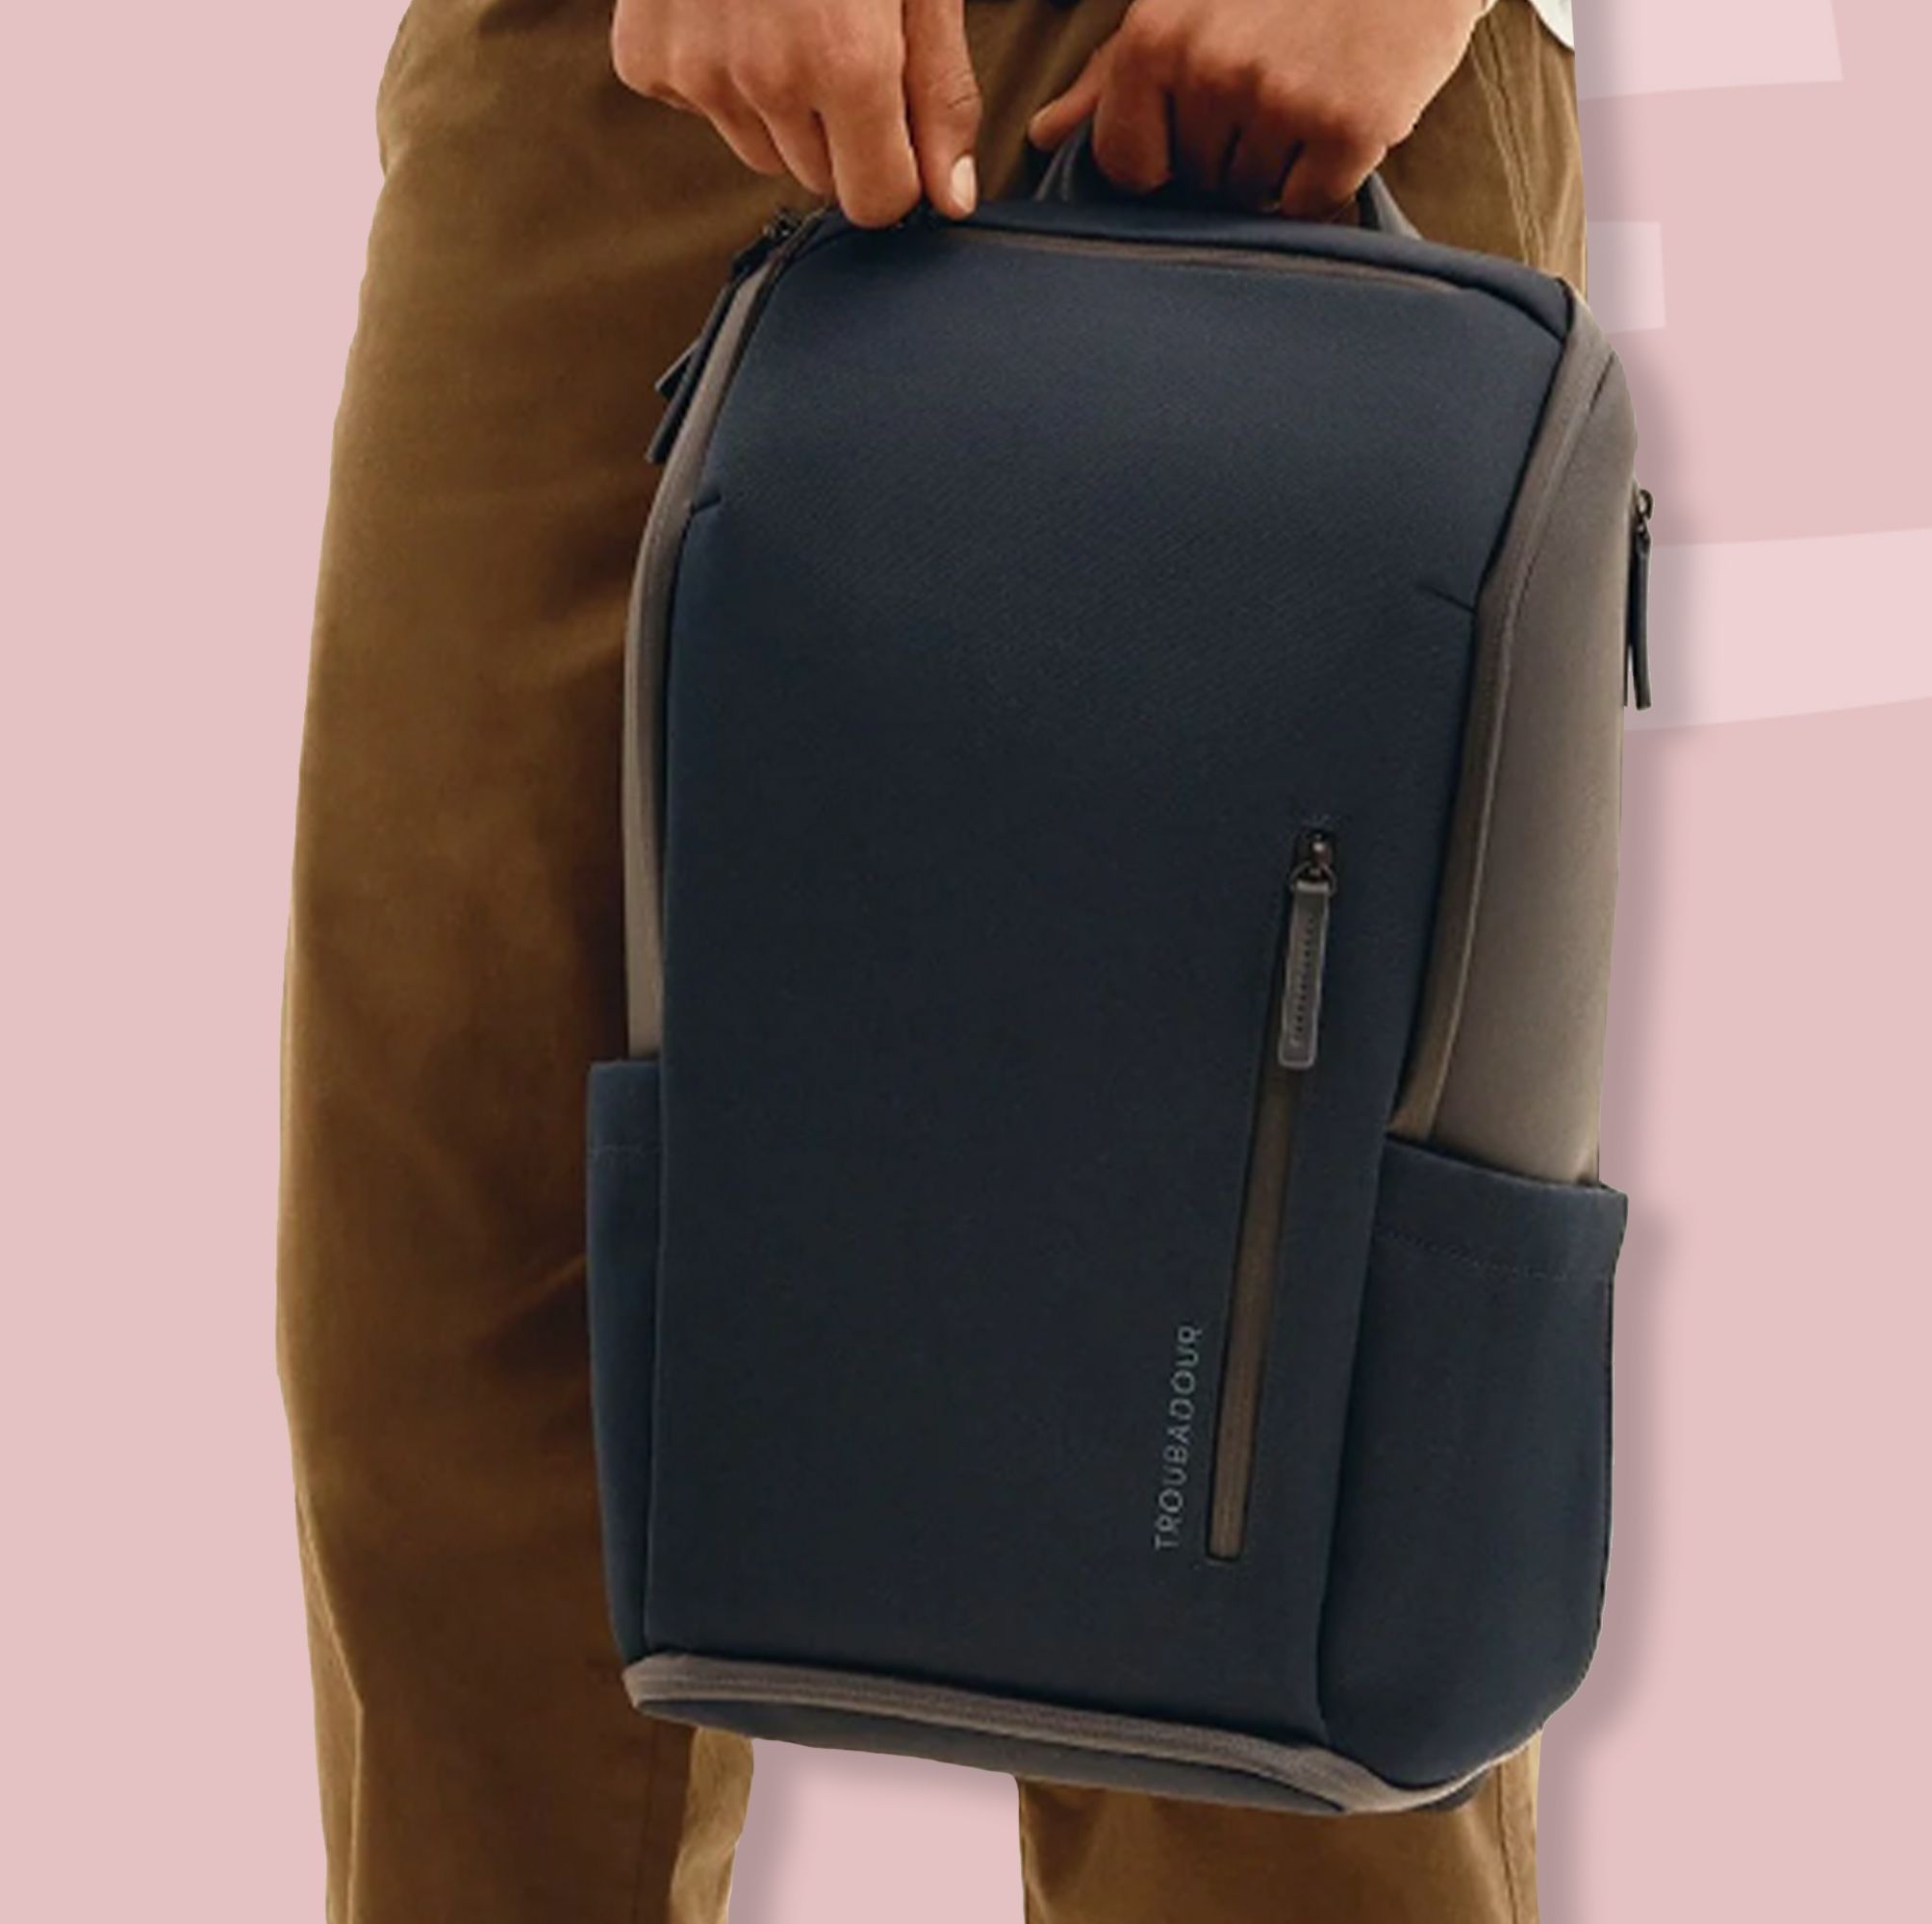 27 Grown-Up Backpacks You Can Carry With Confidence